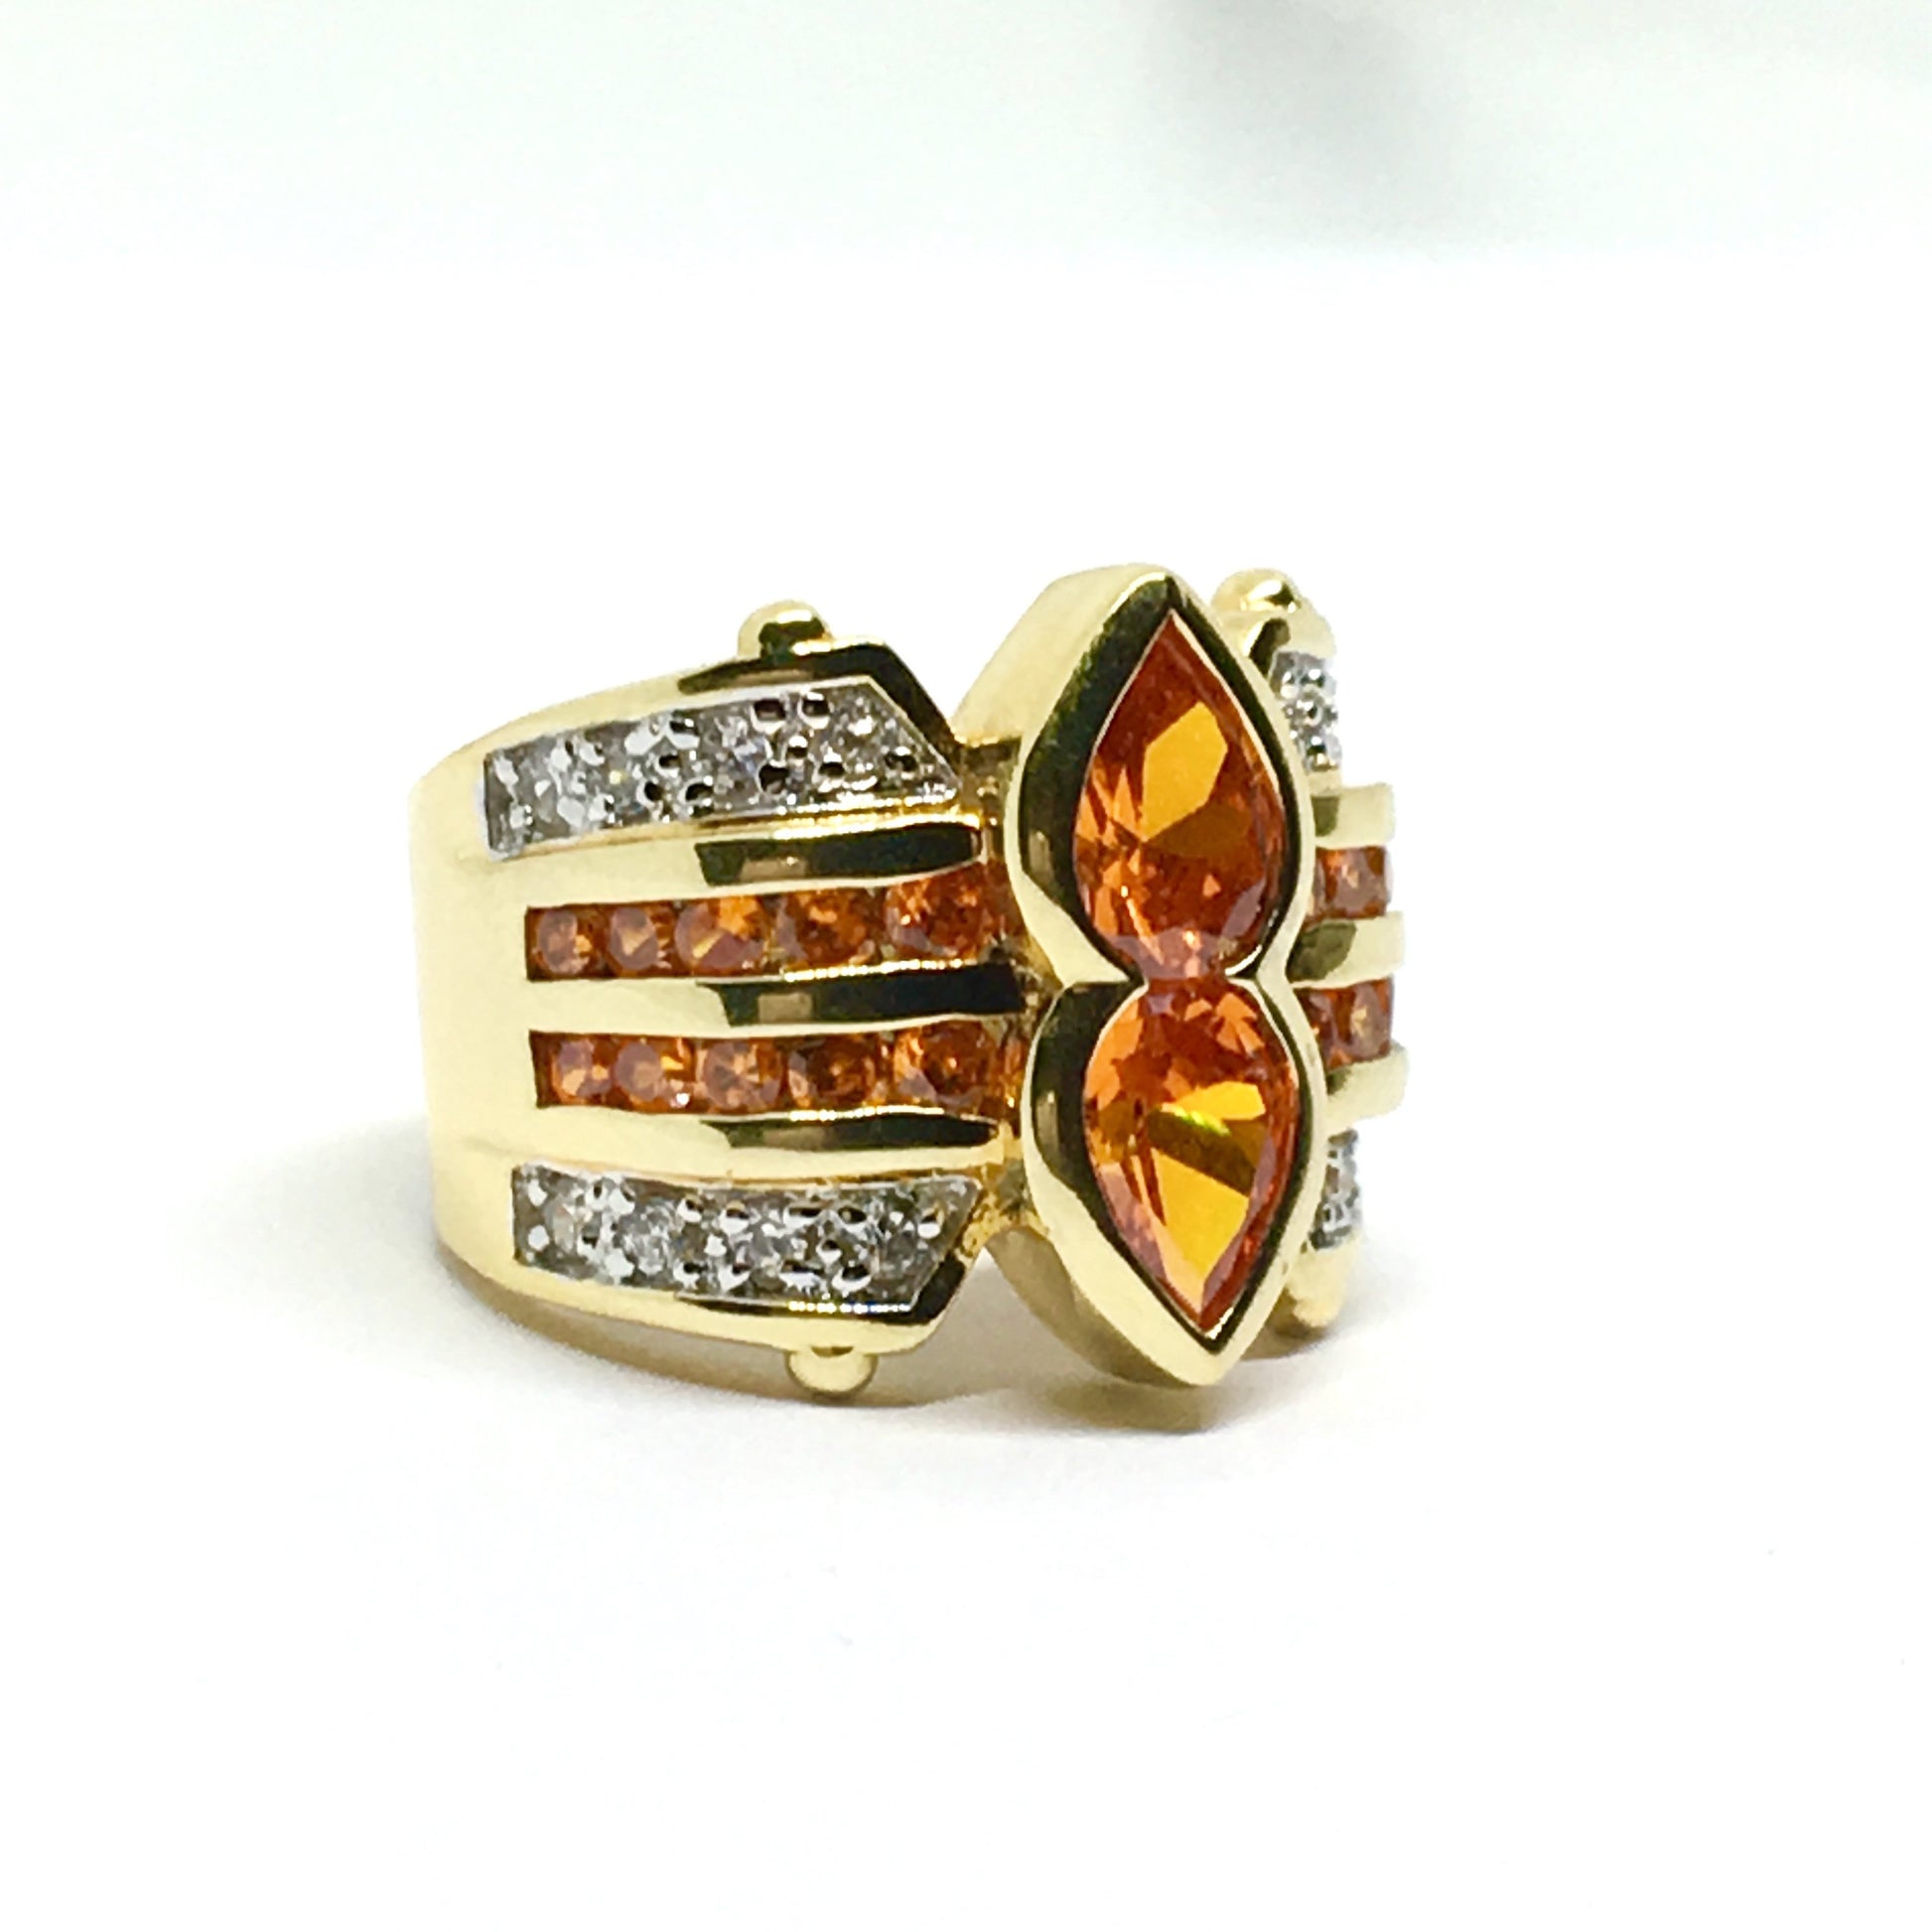 Jewelry  > Used > Ring | 14k Gold Sterling Silver Orange Cz Sapphire Wide Band Ring sz 7  | Blingschlingers Jewelry online USA